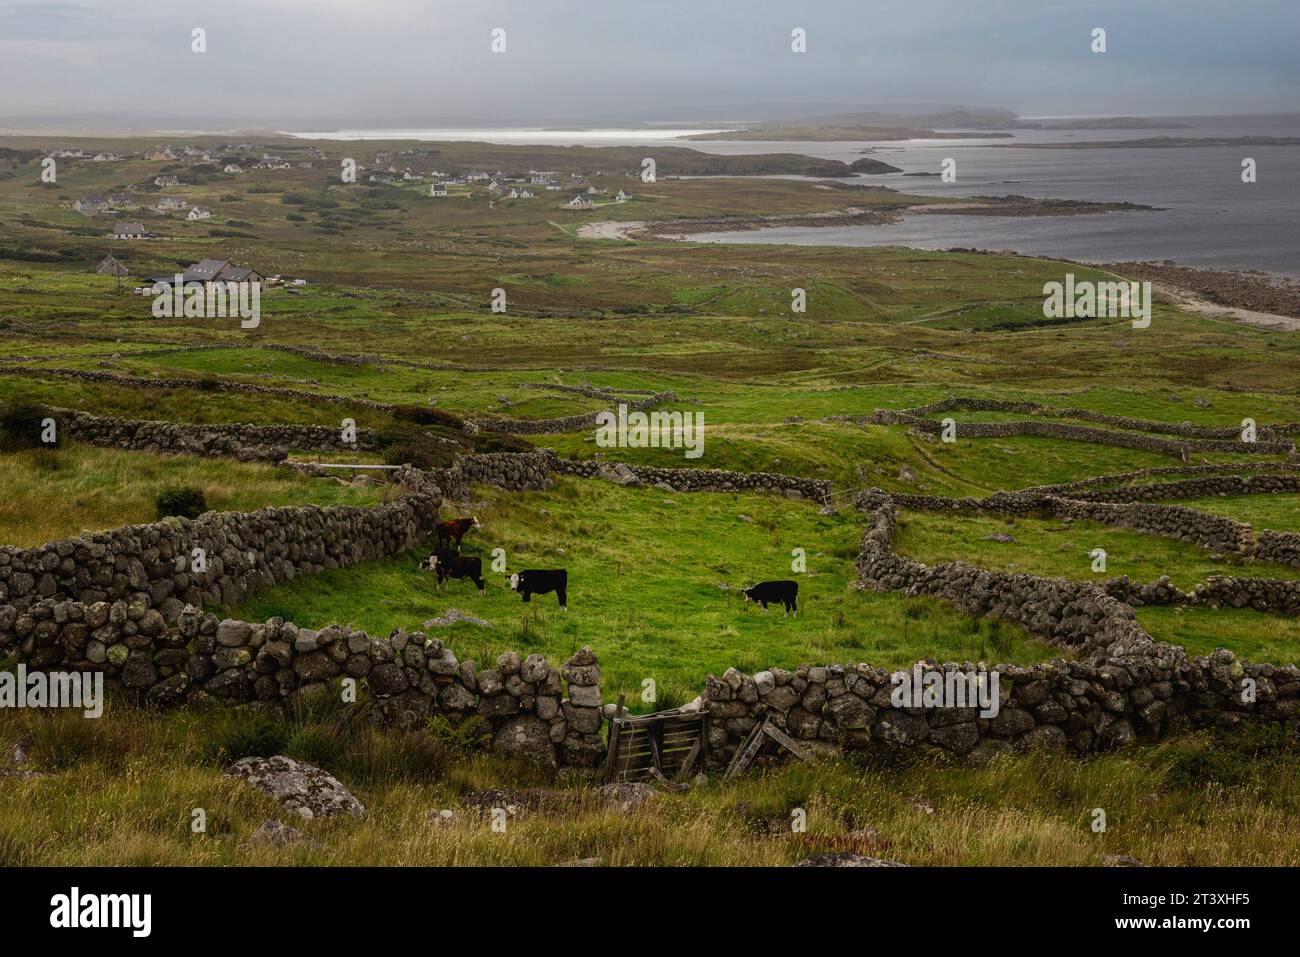 Cnoc Fola, also known as Bloody Foreland, is a viewpoint located on the Wild Atlantic Way in County Donegal, Ireland. Stock Photo